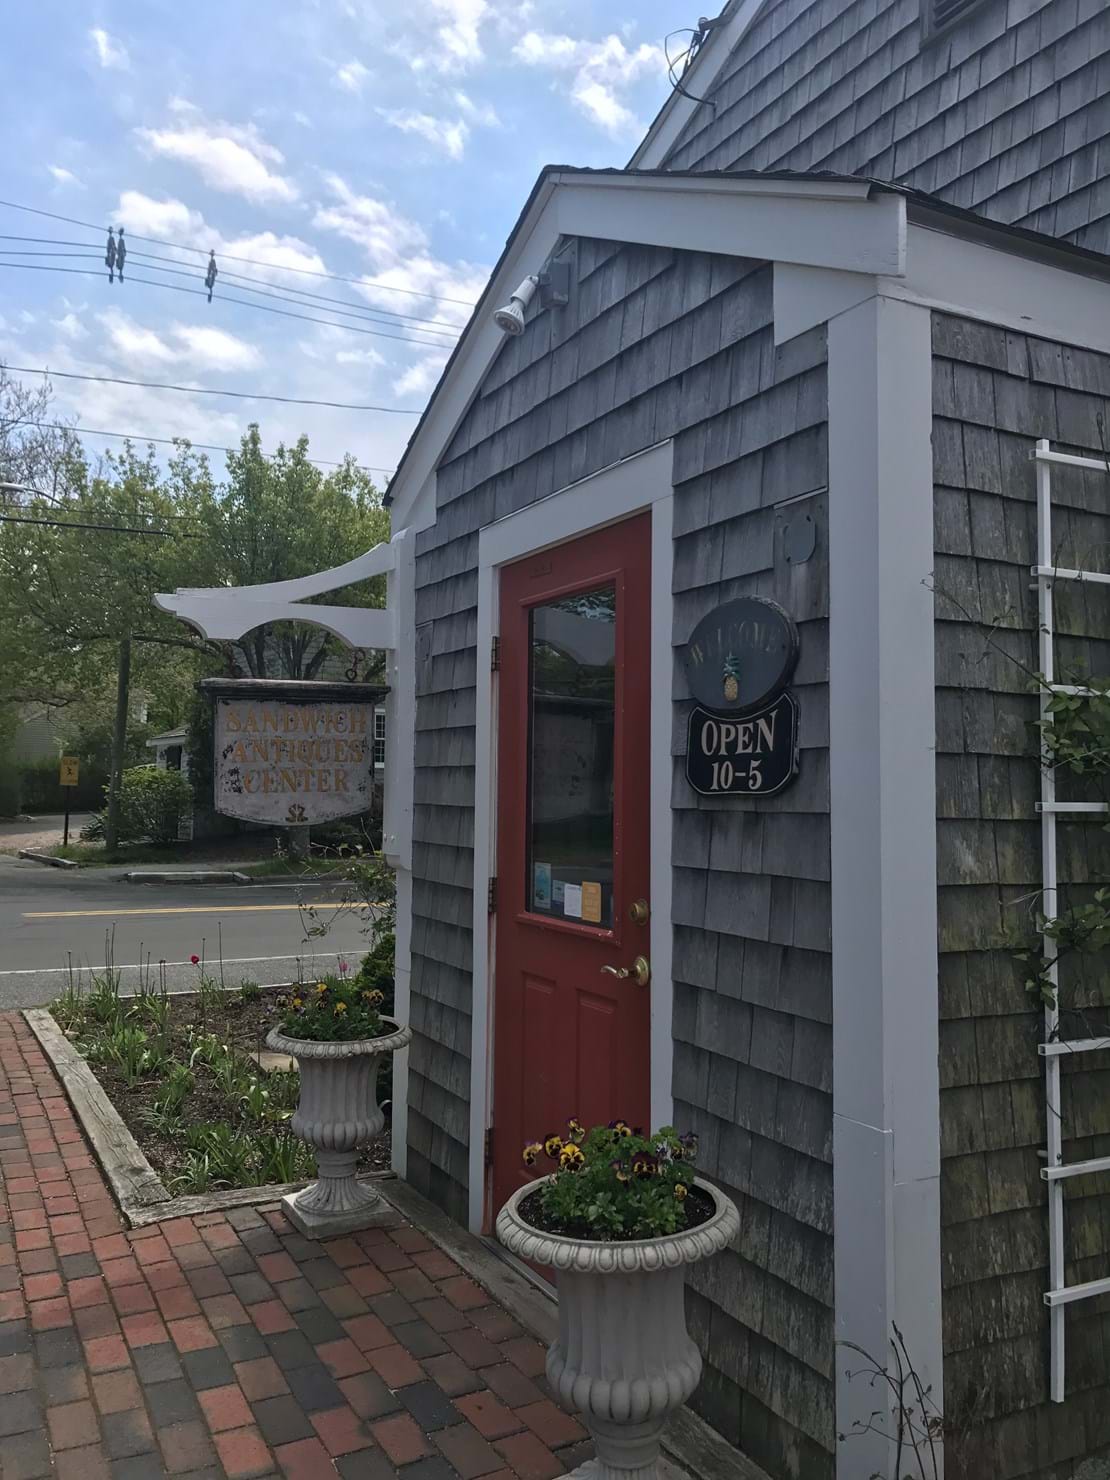 A stunning antique store in Cape Cod